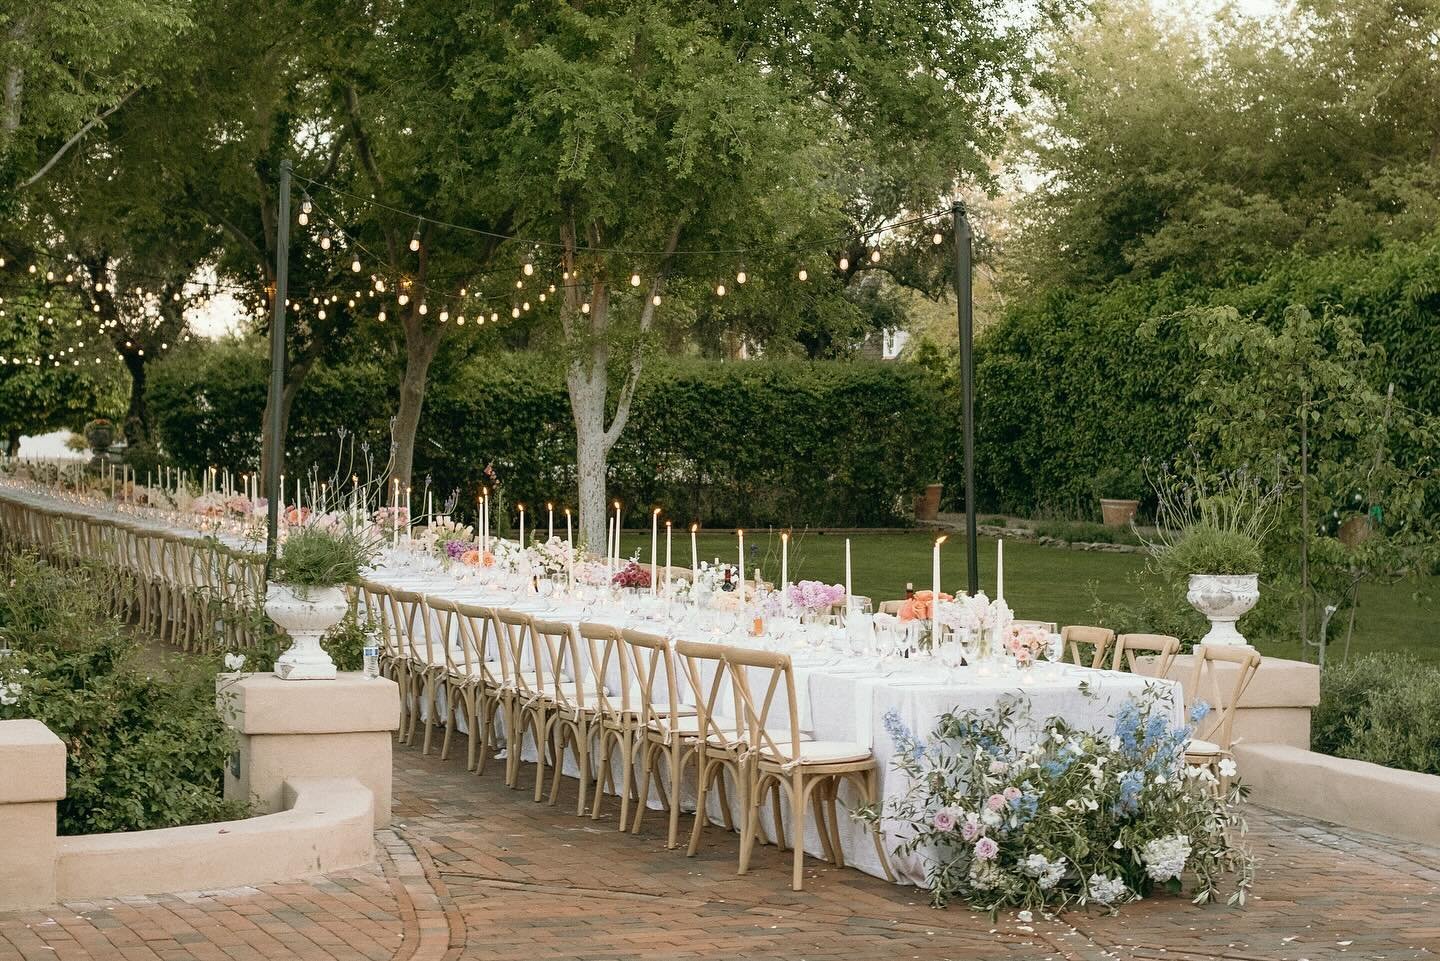 Having one long dinner table at a wedding creates a unique and intimate atmosphere. Unlike separate tables, it encourages guests to interact more easily, fostering conversations and connections among everyone present. It also provides a sense of unit